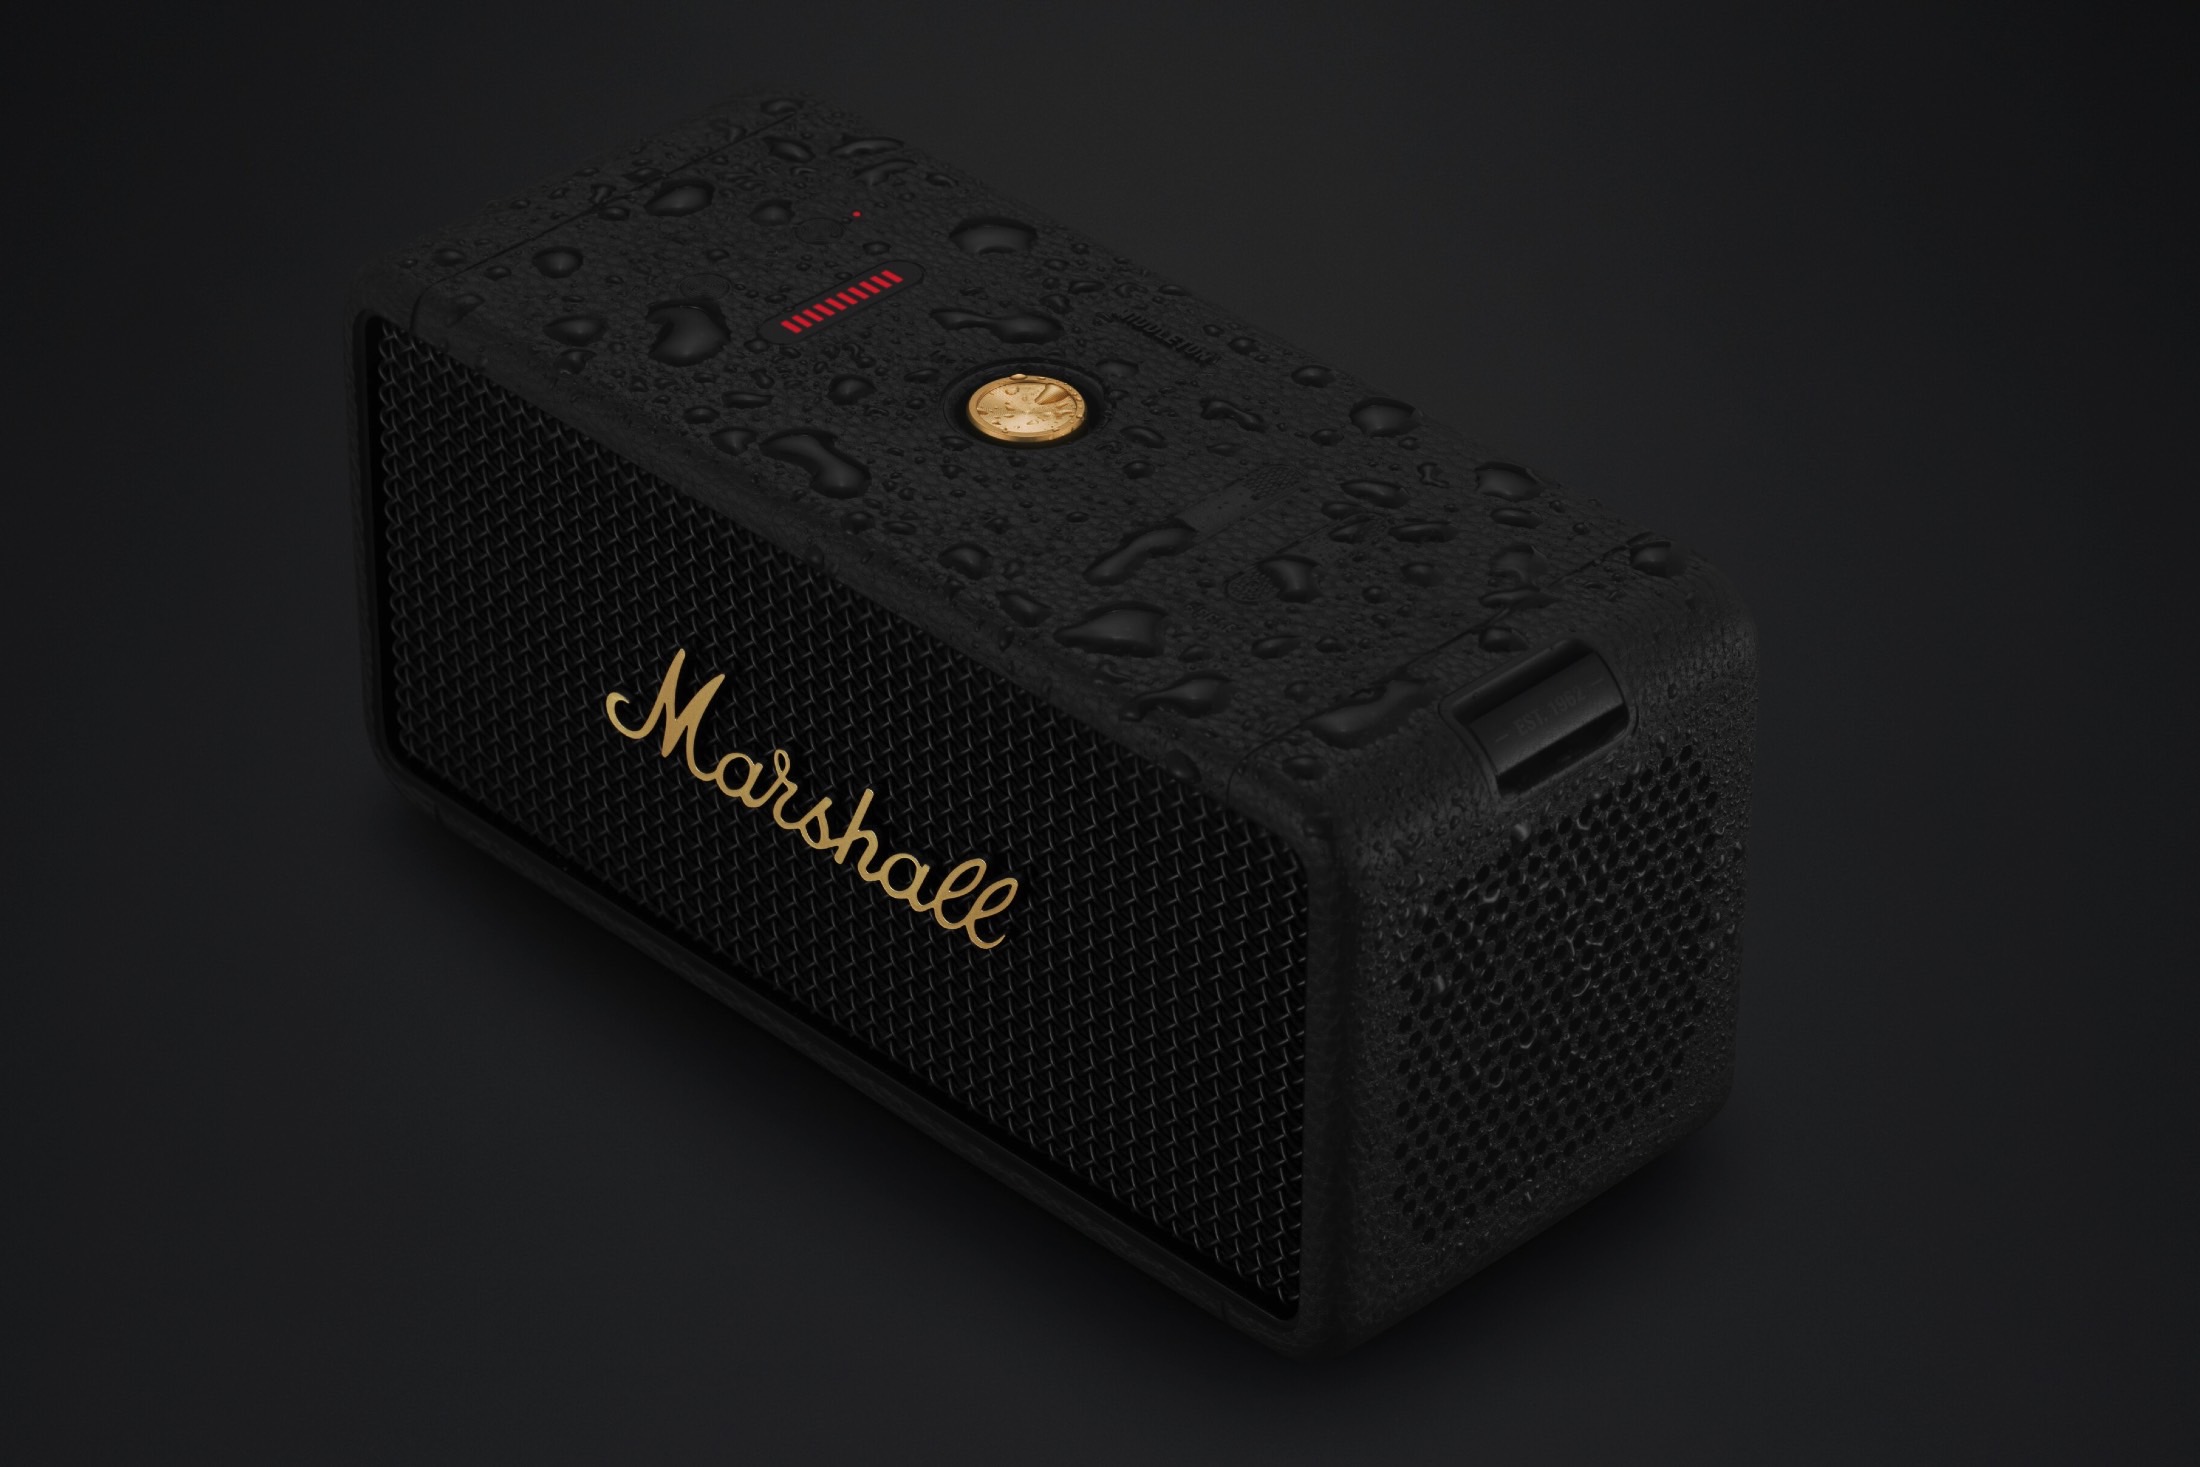 Marshall's latest Bluetooth speaker has four drivers for 360 sound